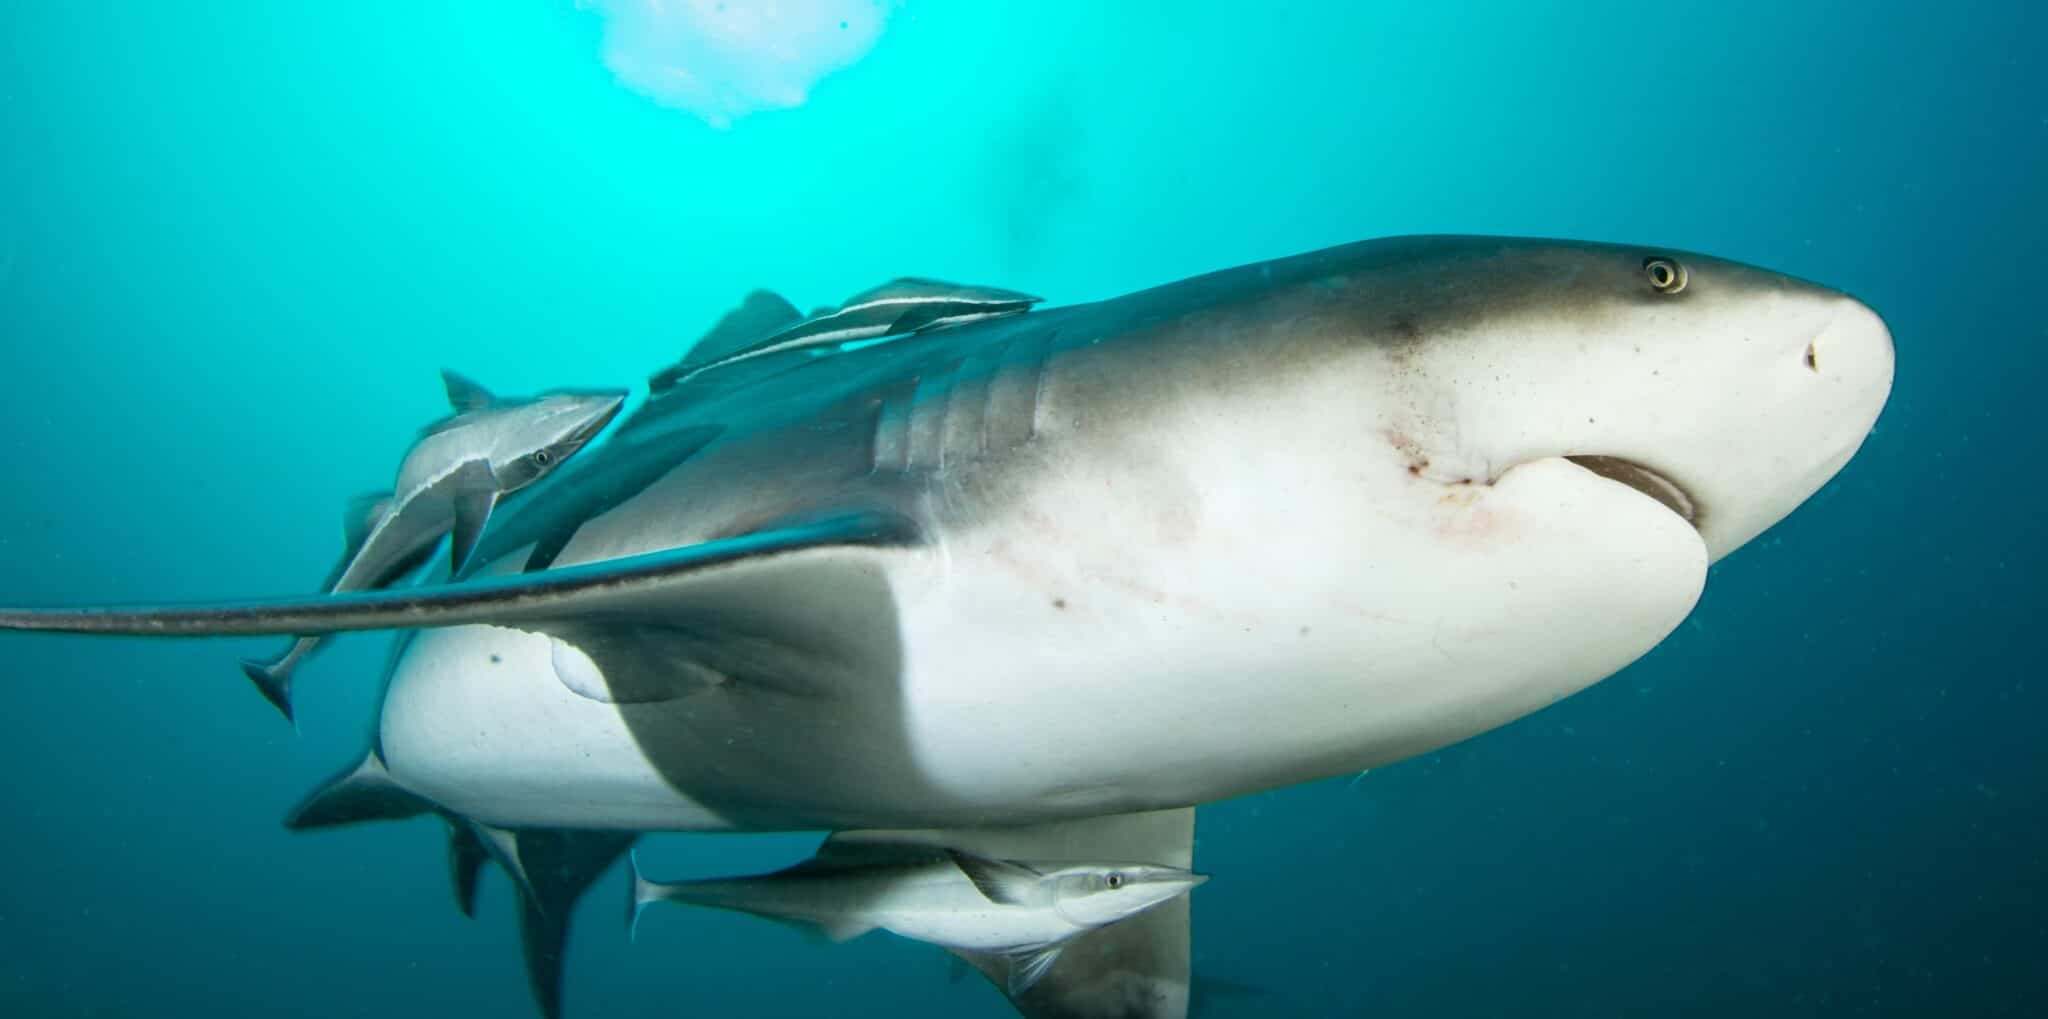 meet-the-fearless-fish-that-turns-into-a-dentist-and-cleans-sharks